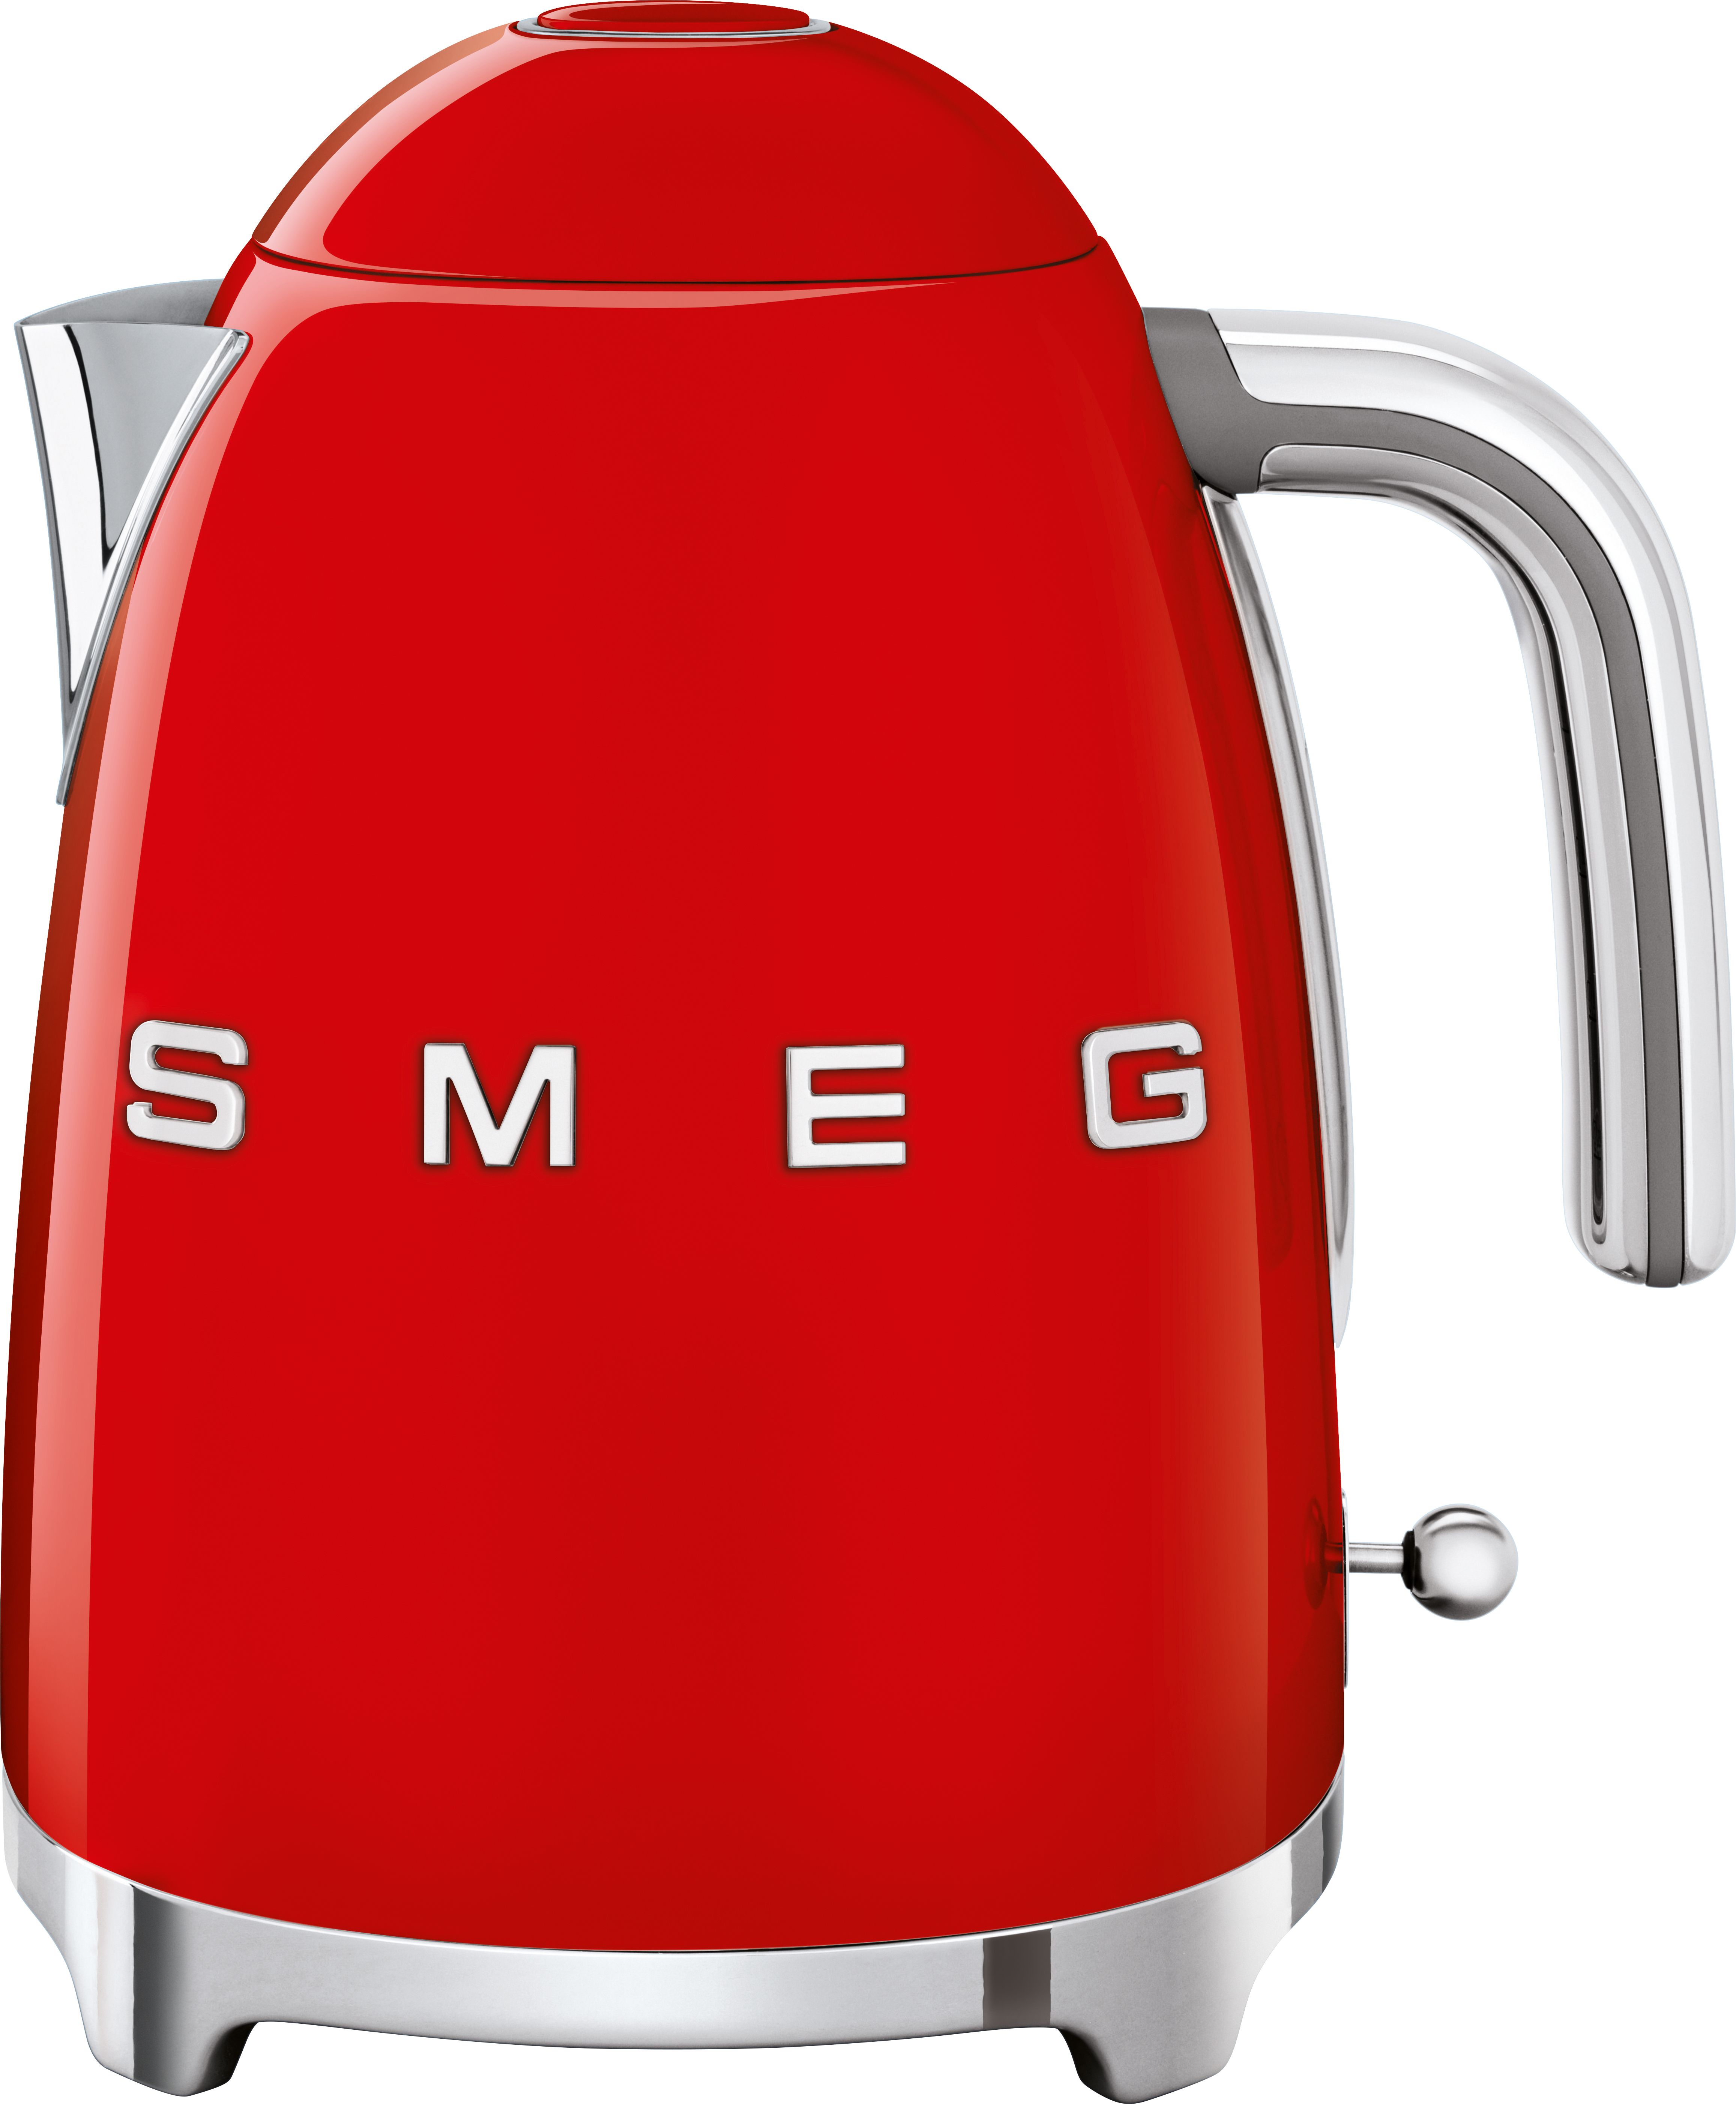 Smeg 50's Retro KLF03RDUK Kettle - Red, Red